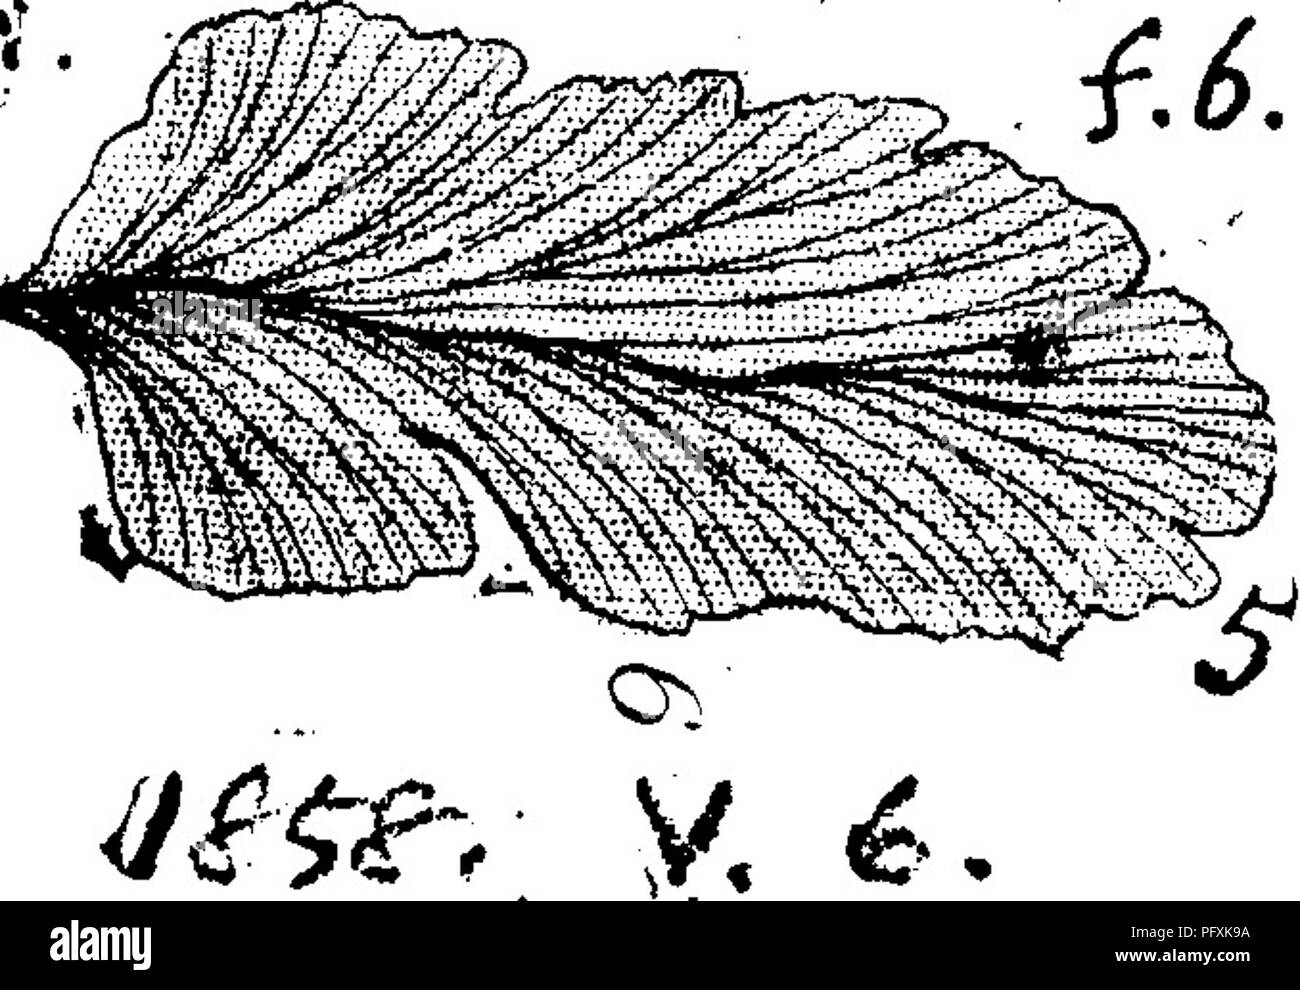 . A dictionary of the fossils of Pennsylvania and neighboring states named in the reports and catalogues of the survey ... Paleontology. Neur. 454 XjK. iii^e% Neuropteris crenulata ? ' Brgt. Lesq. Geol. Pa. 1858, p. 859, pi. 5, fig. 6; one single leaf of this J^^' European fern, found by Lesquereux at the Anthracite Salem vein, Pottsville ; but its nervation and very small round teeth around the leaf identified it. Also, Coal Flora, 1880, p. 116, pi. 16, figs. 9 to 11. Specimens from Wilkesbarre, and from the Tre- mont tunnel vein, throw doubt on the identity. (Lesq.) A few specimens at Cannel Stock Photo